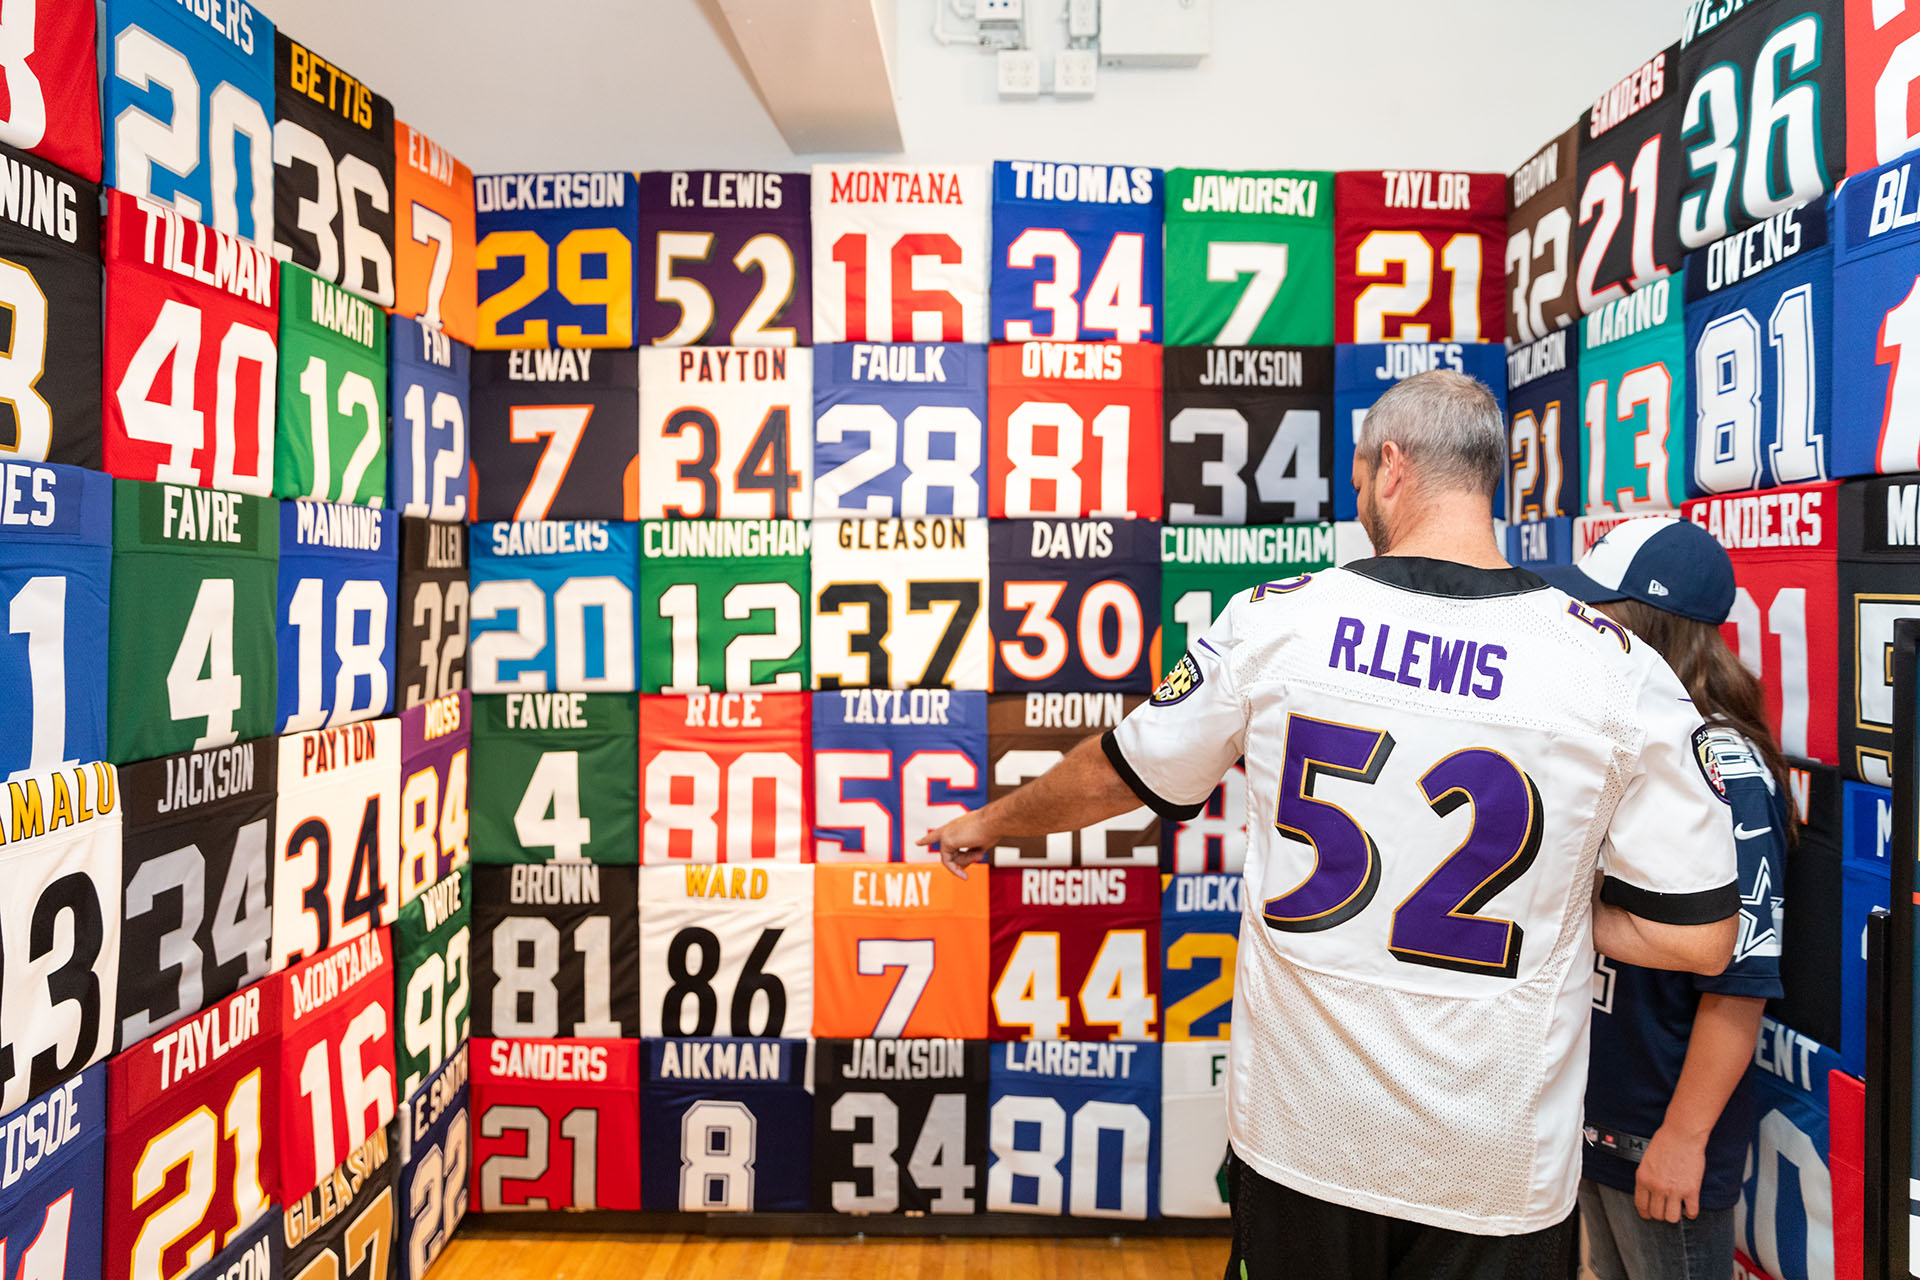 Fans looking at a display wall of NFL jerseys